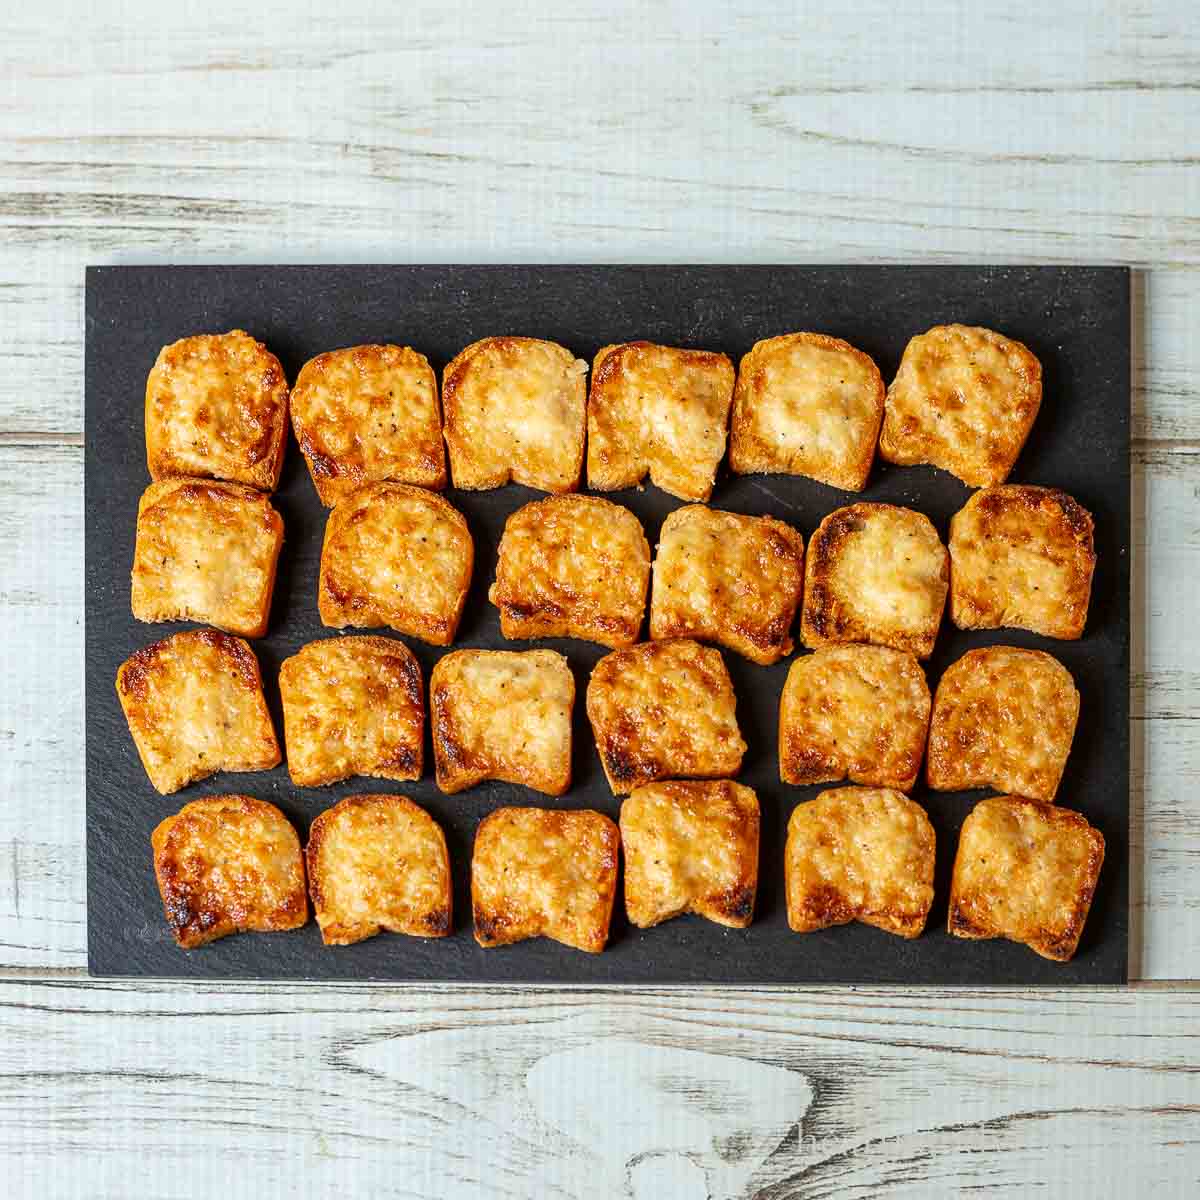 Parmesan bread bites on a black serving slate all lined up in rows.